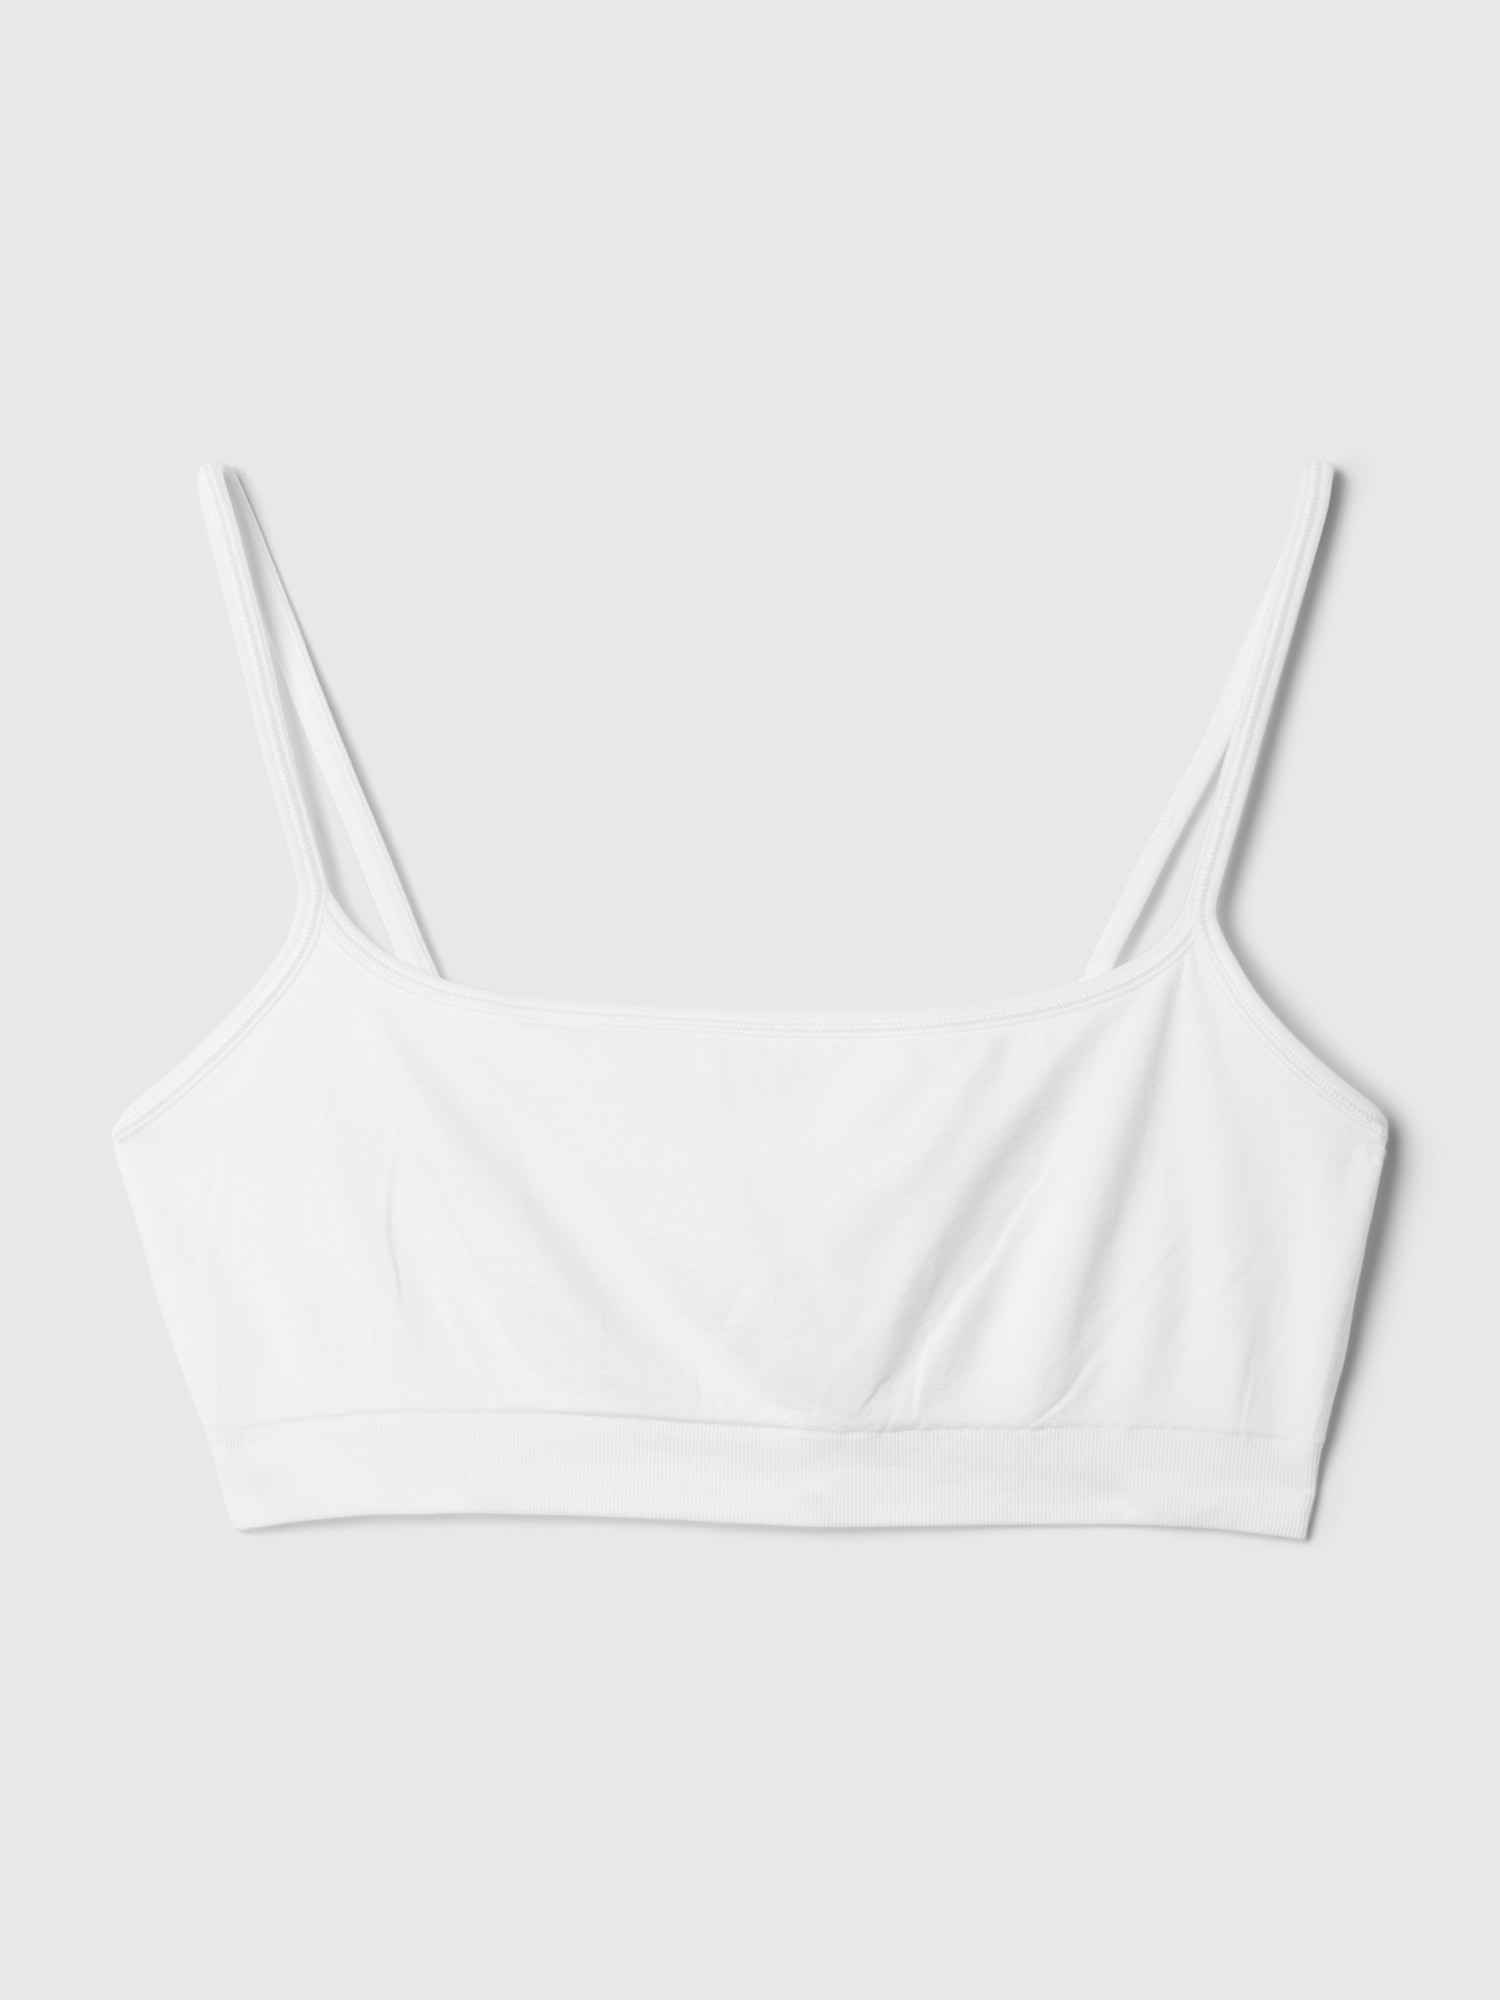 SOO & SOO Firm Ribbed No Wire Bralette Volume Cap Strap Top